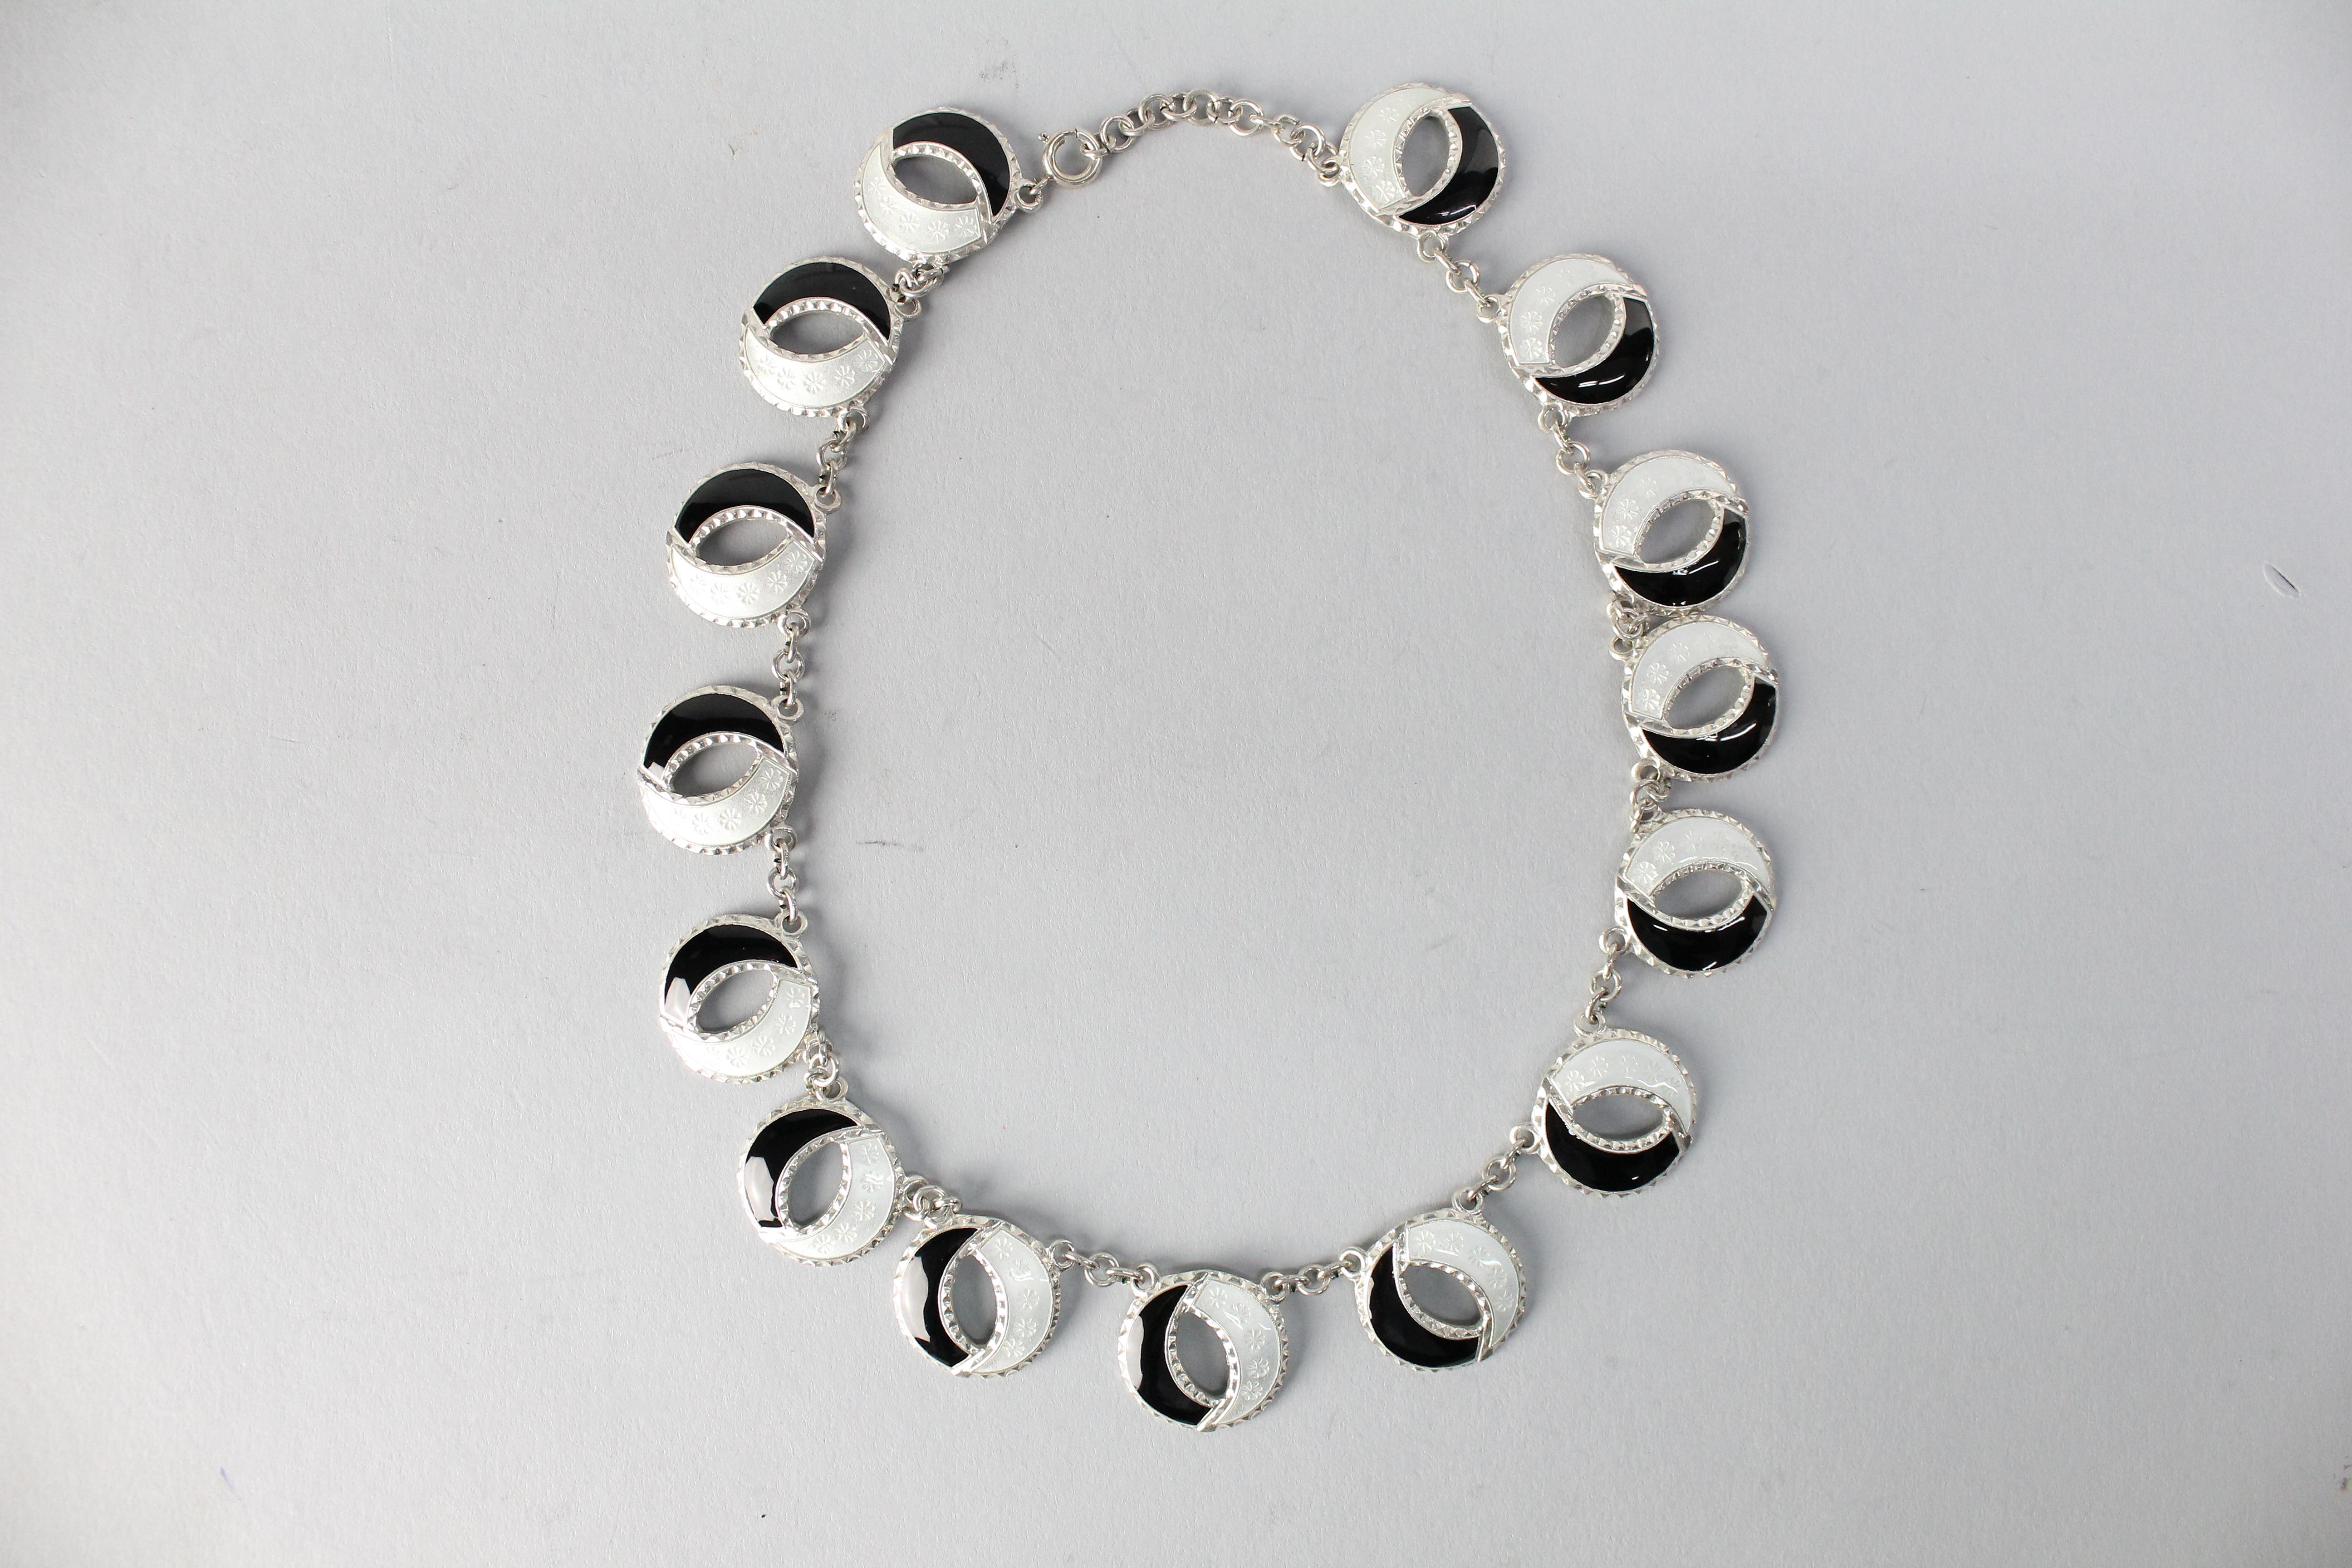 Wonderful sterling necklace with black and white enamel. 
Fully marked and in a really good condition.

Jens Ingvald Andresen 1901-1974 was an apprentice at the workshop to Hjortdahl & Meldahl from 1915 to 1919. He stayed with the firm until 1931